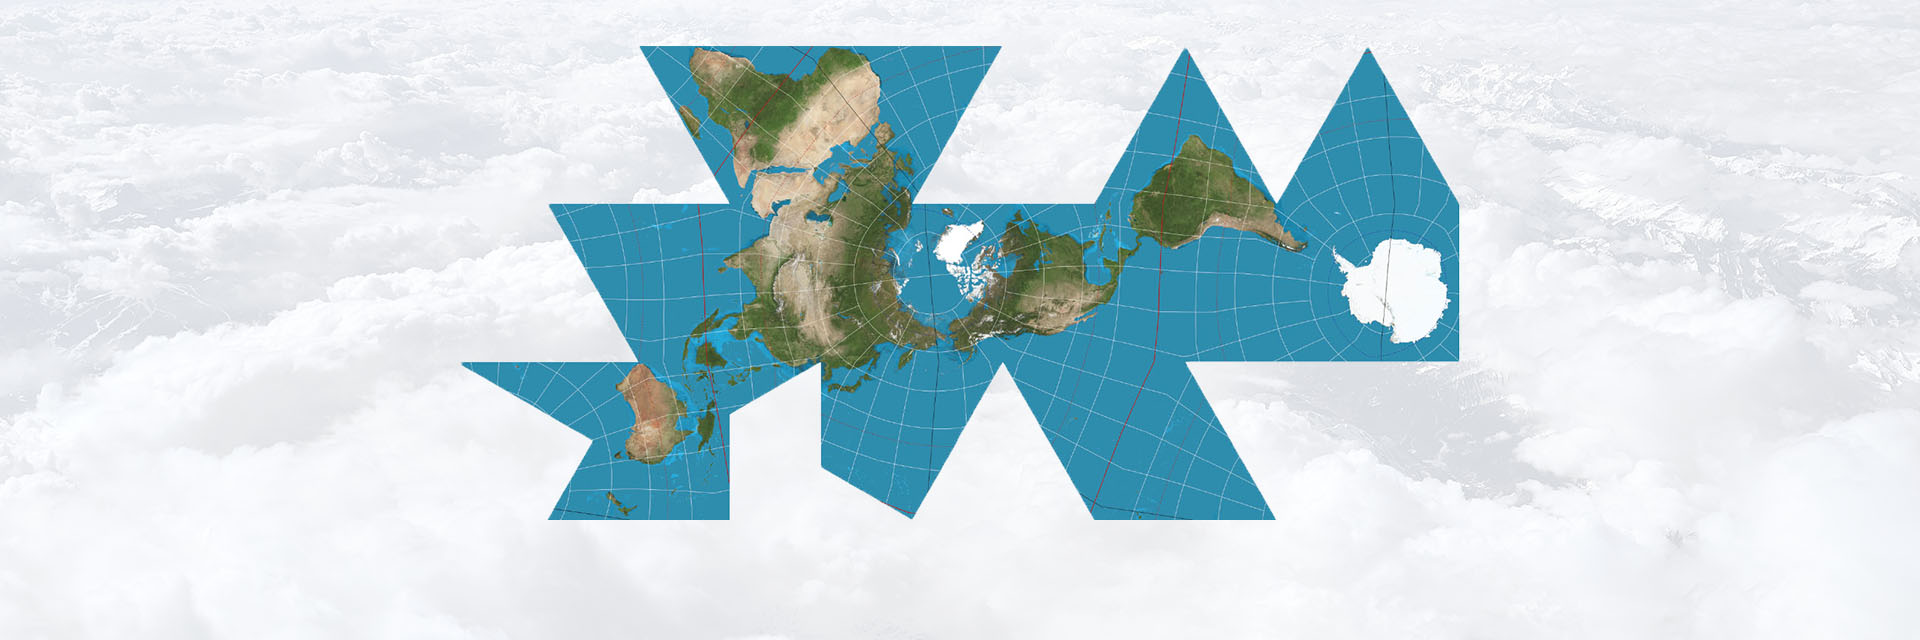 Dymaxion world map placed over clouds.